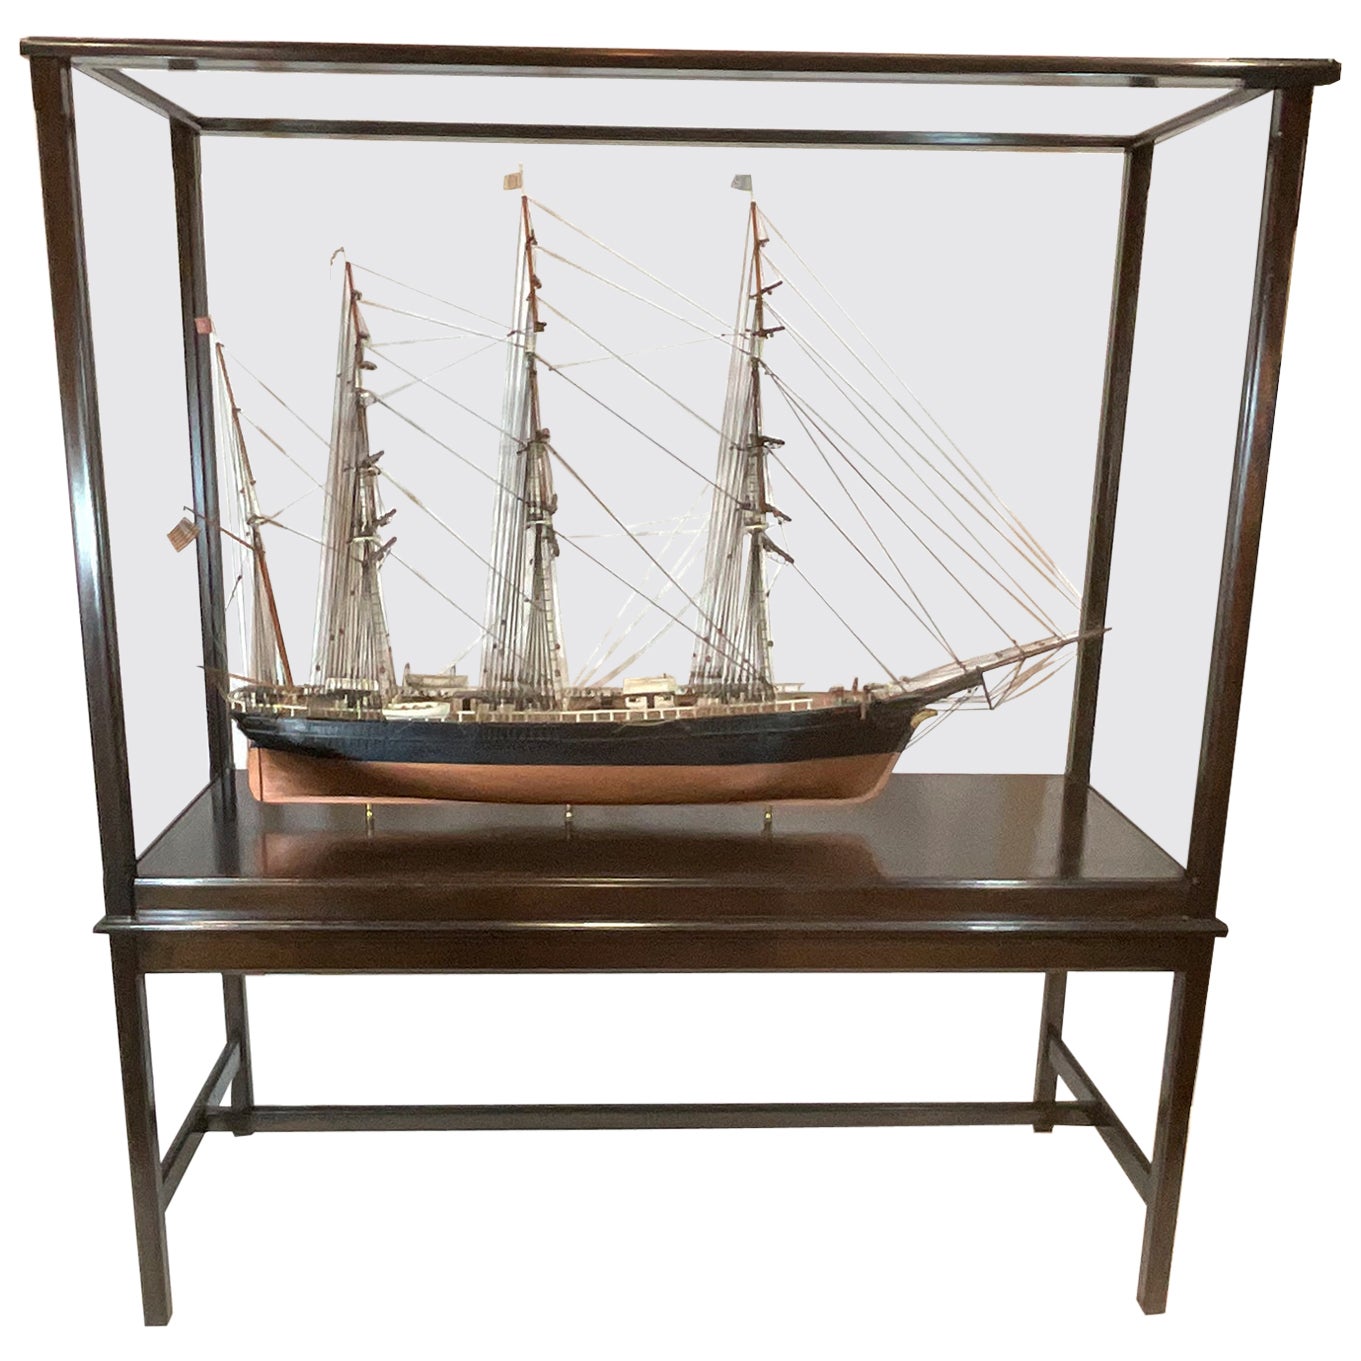 Model Of The Clipper Ship “flying Cloud” For Sale At 1stdibs Flying Cloud Ship Flying Cloud